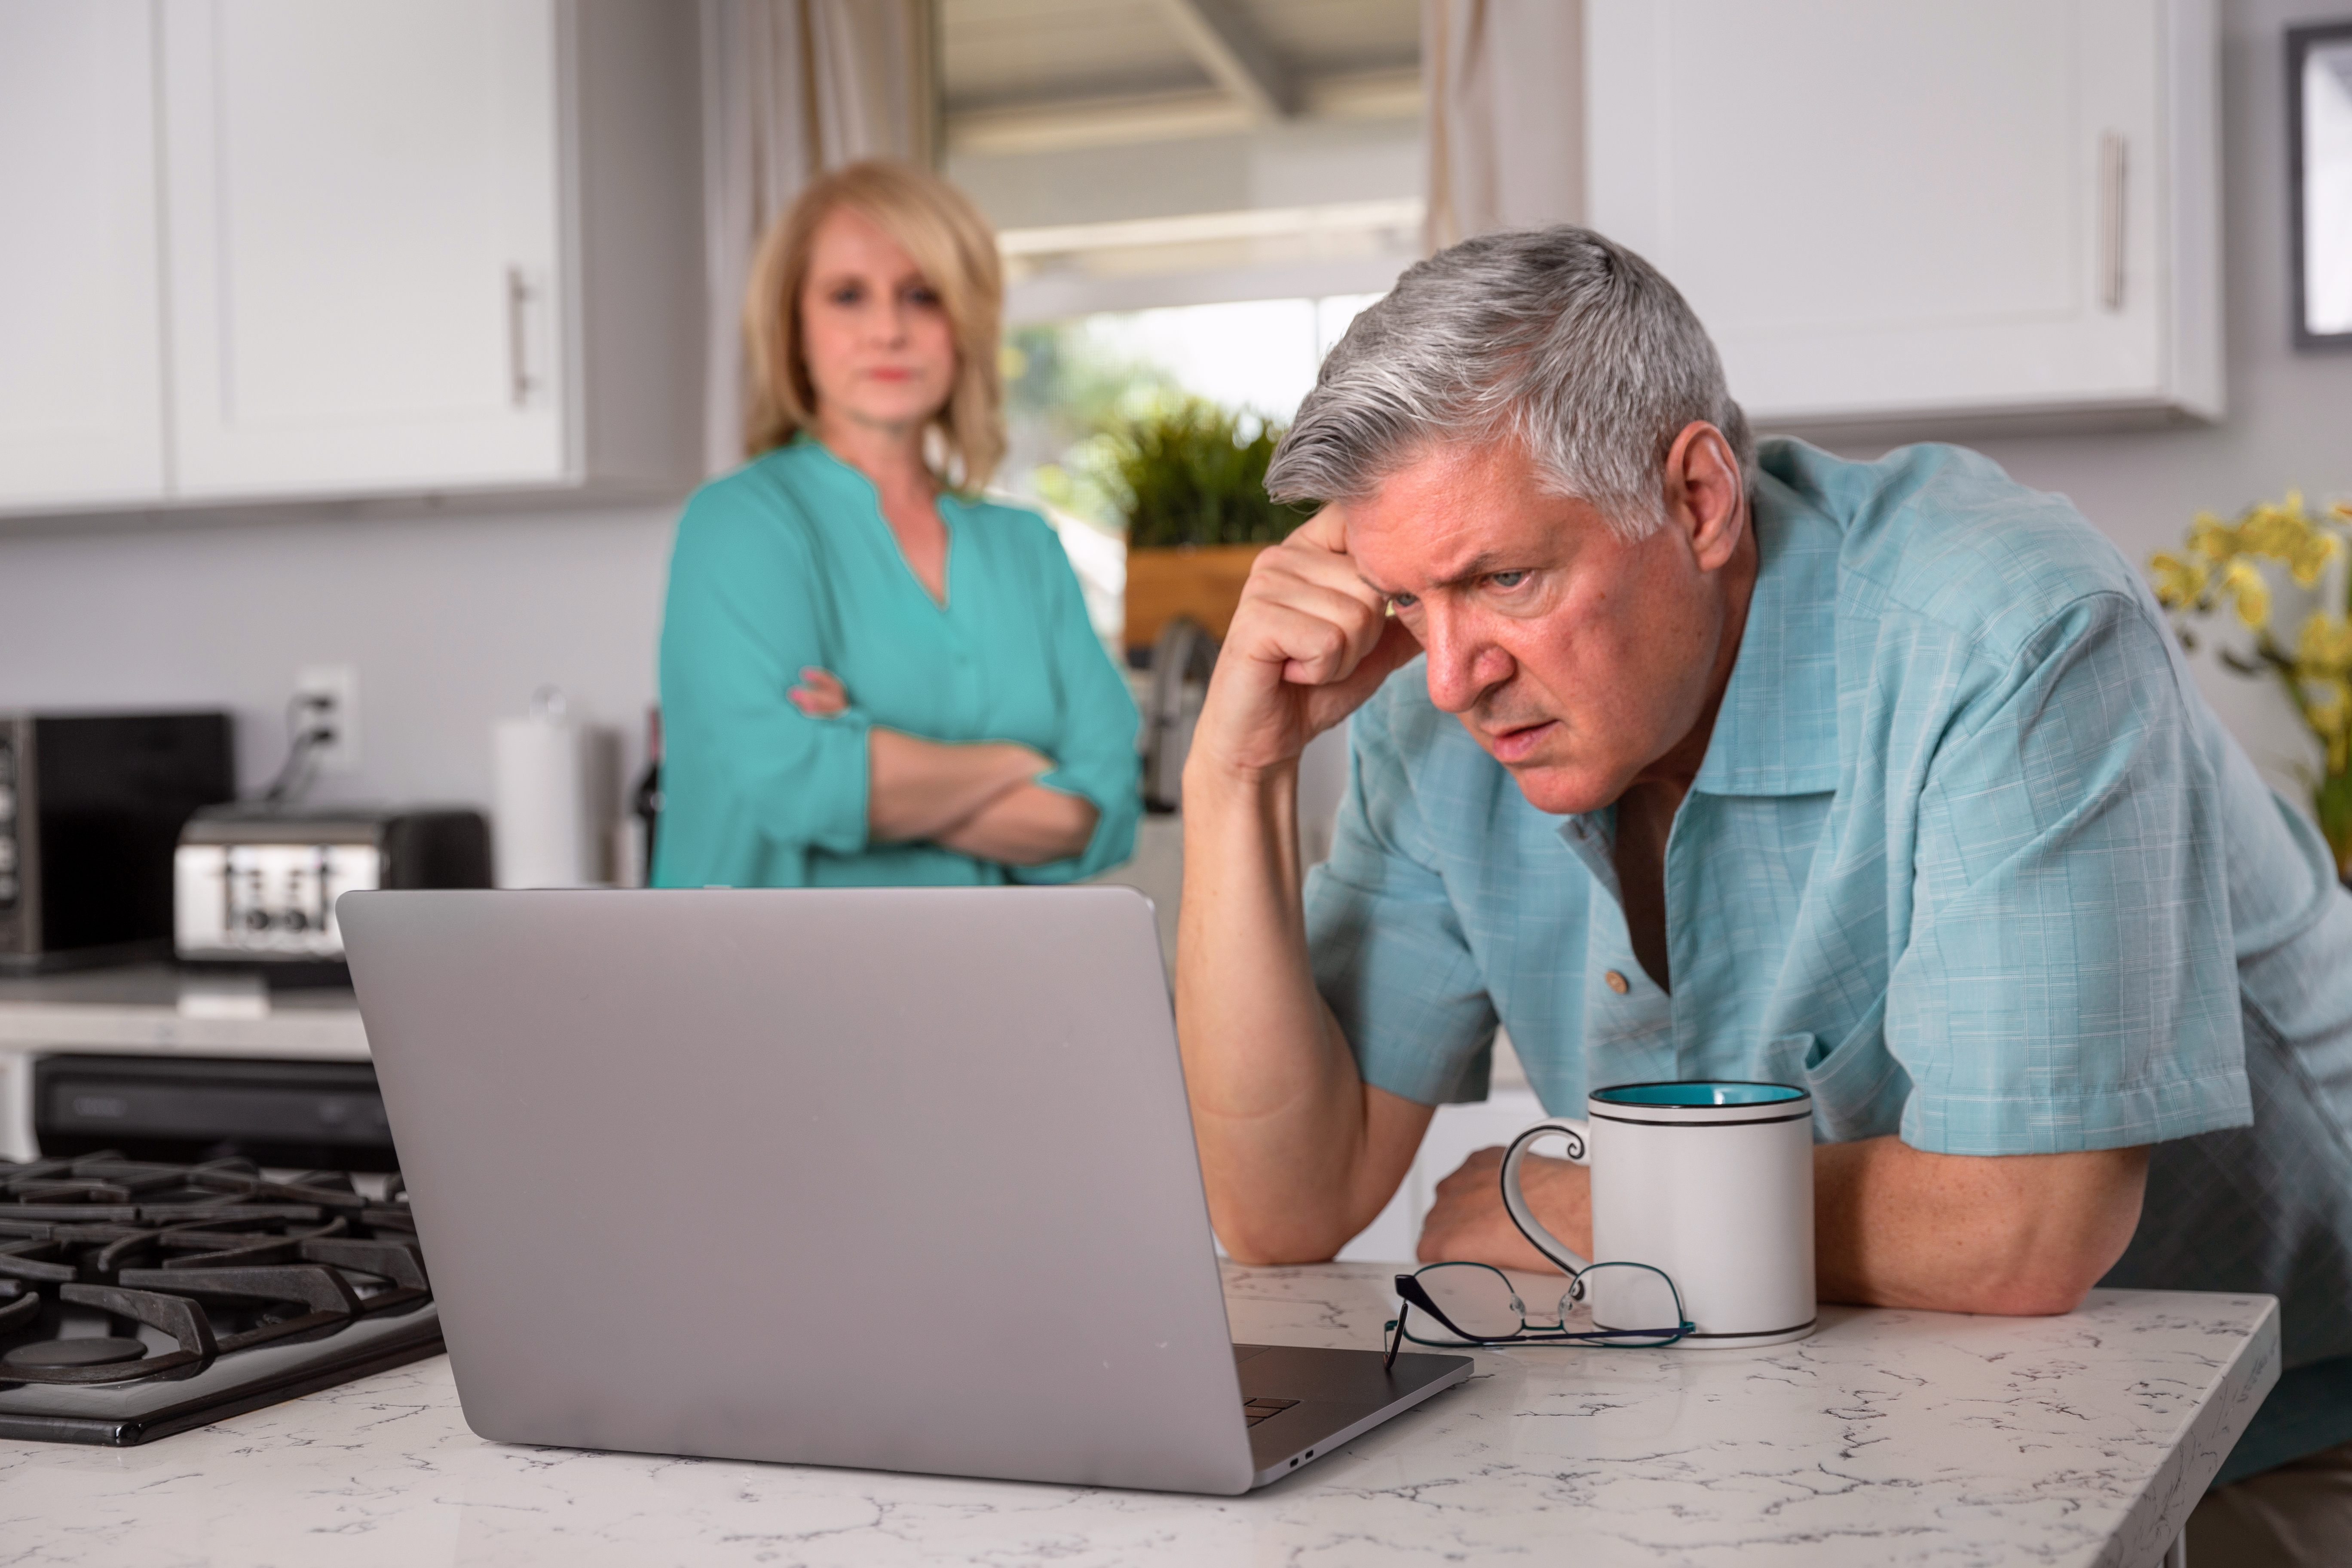 A father looking concerned at a laptop | Source: Shutterstock